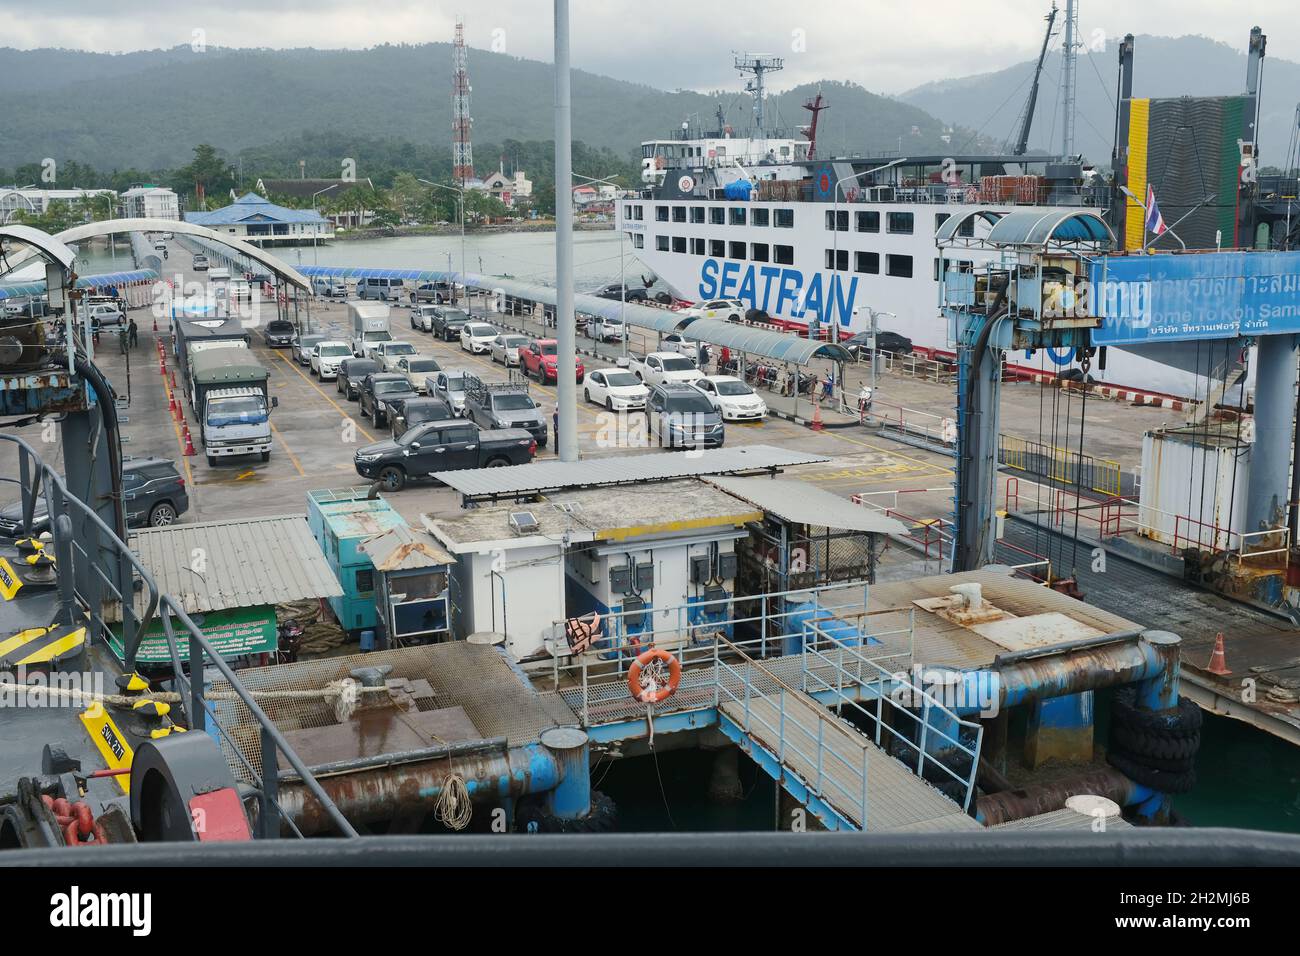 Vehicles being loaded at Ko Samui ferry part, Thailand Stock Photo